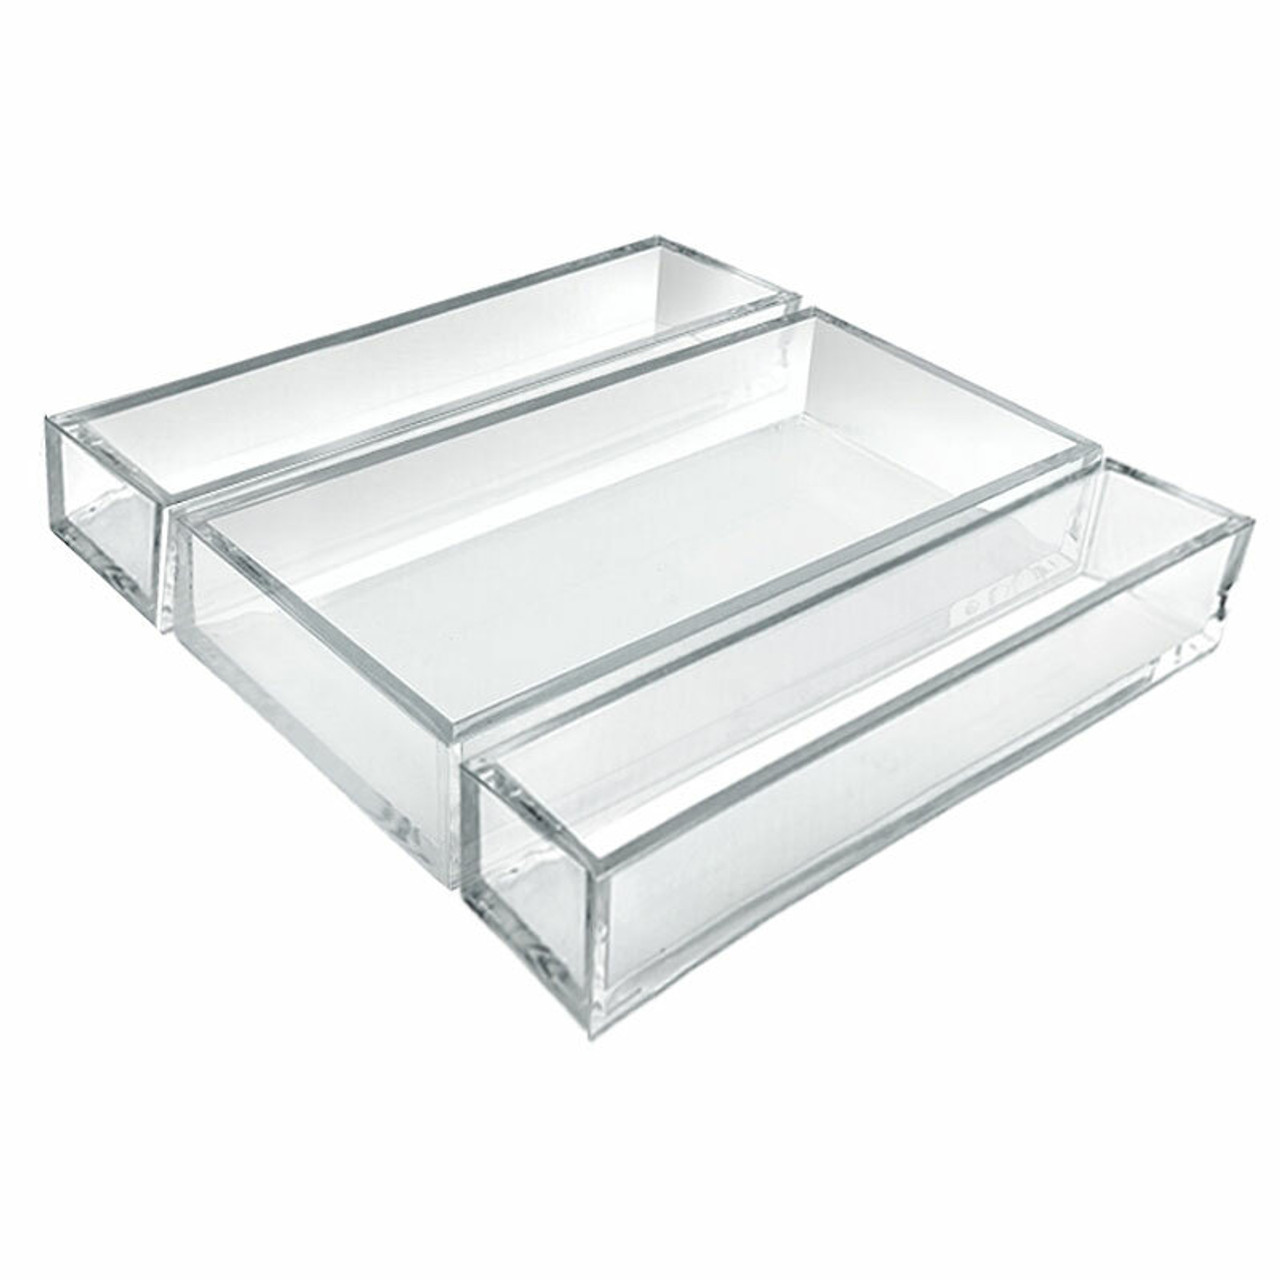 Deluxe 3 Piece Clear Acrylic Tray Set, Two Narrow Rectangle Trays and One  Large Rectangle Tray Organizer for Desk or Counter